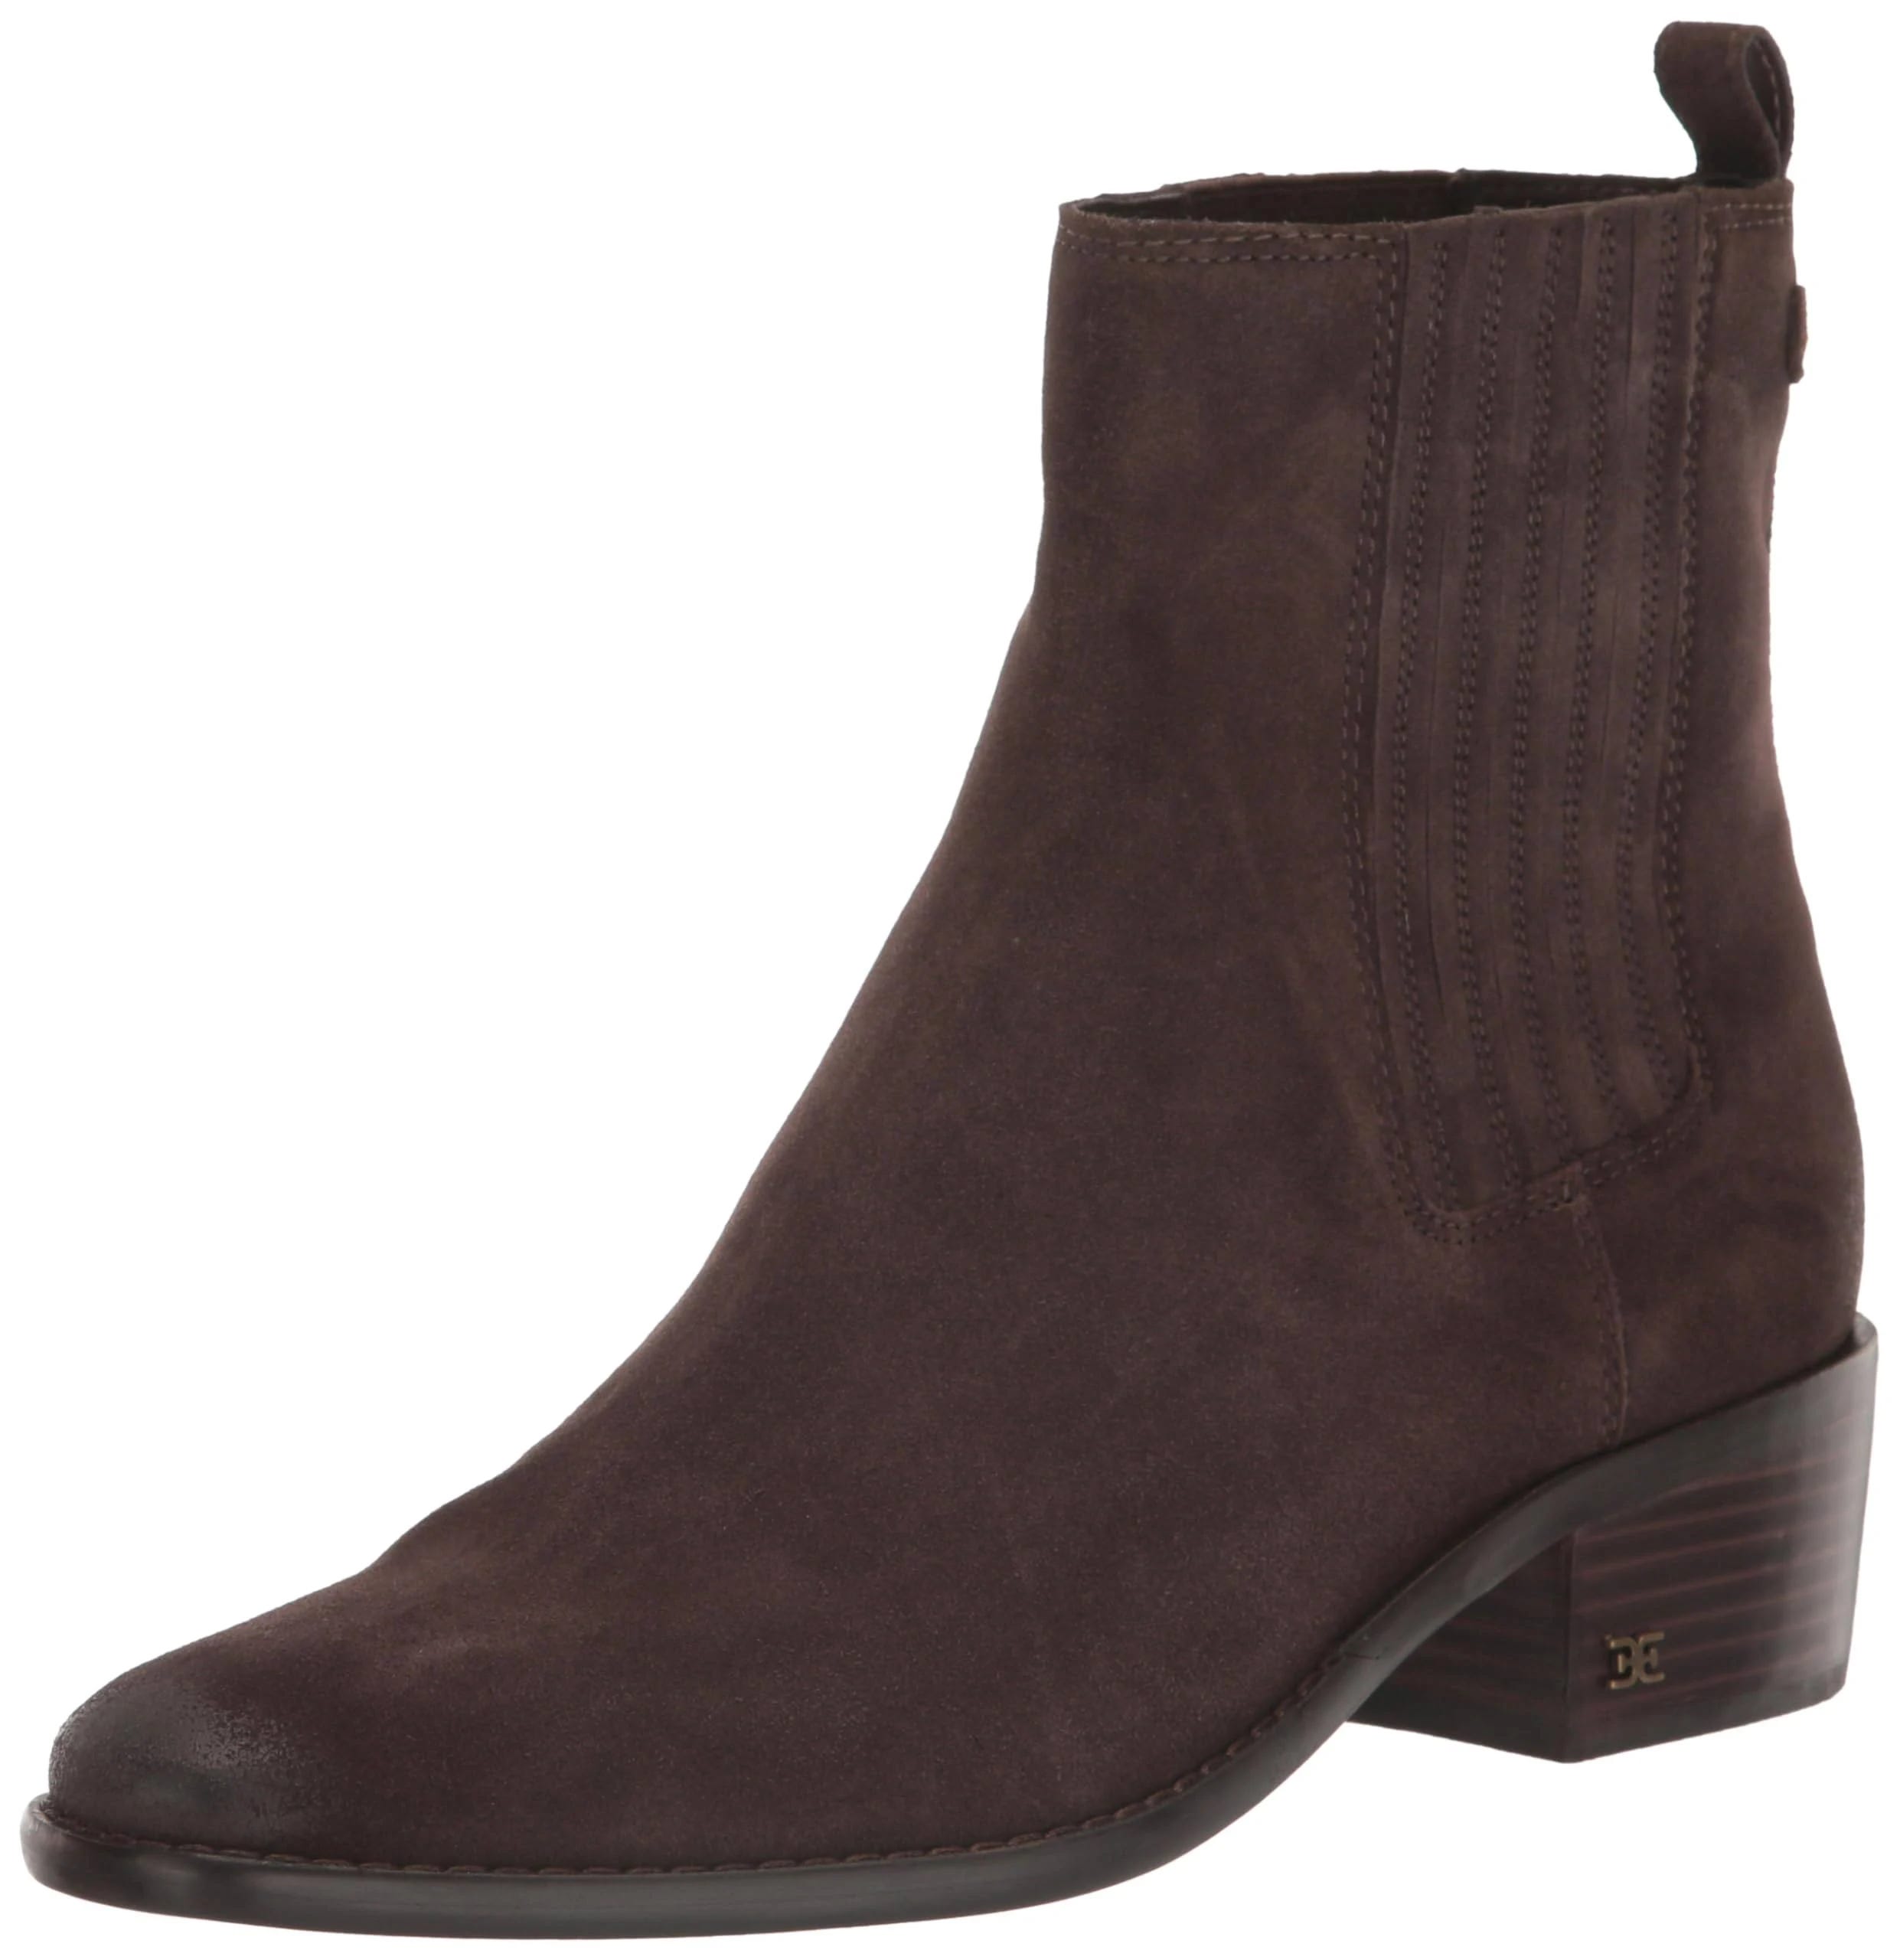 Stylish and Comfortable Suede Boots for All Seasons | Image